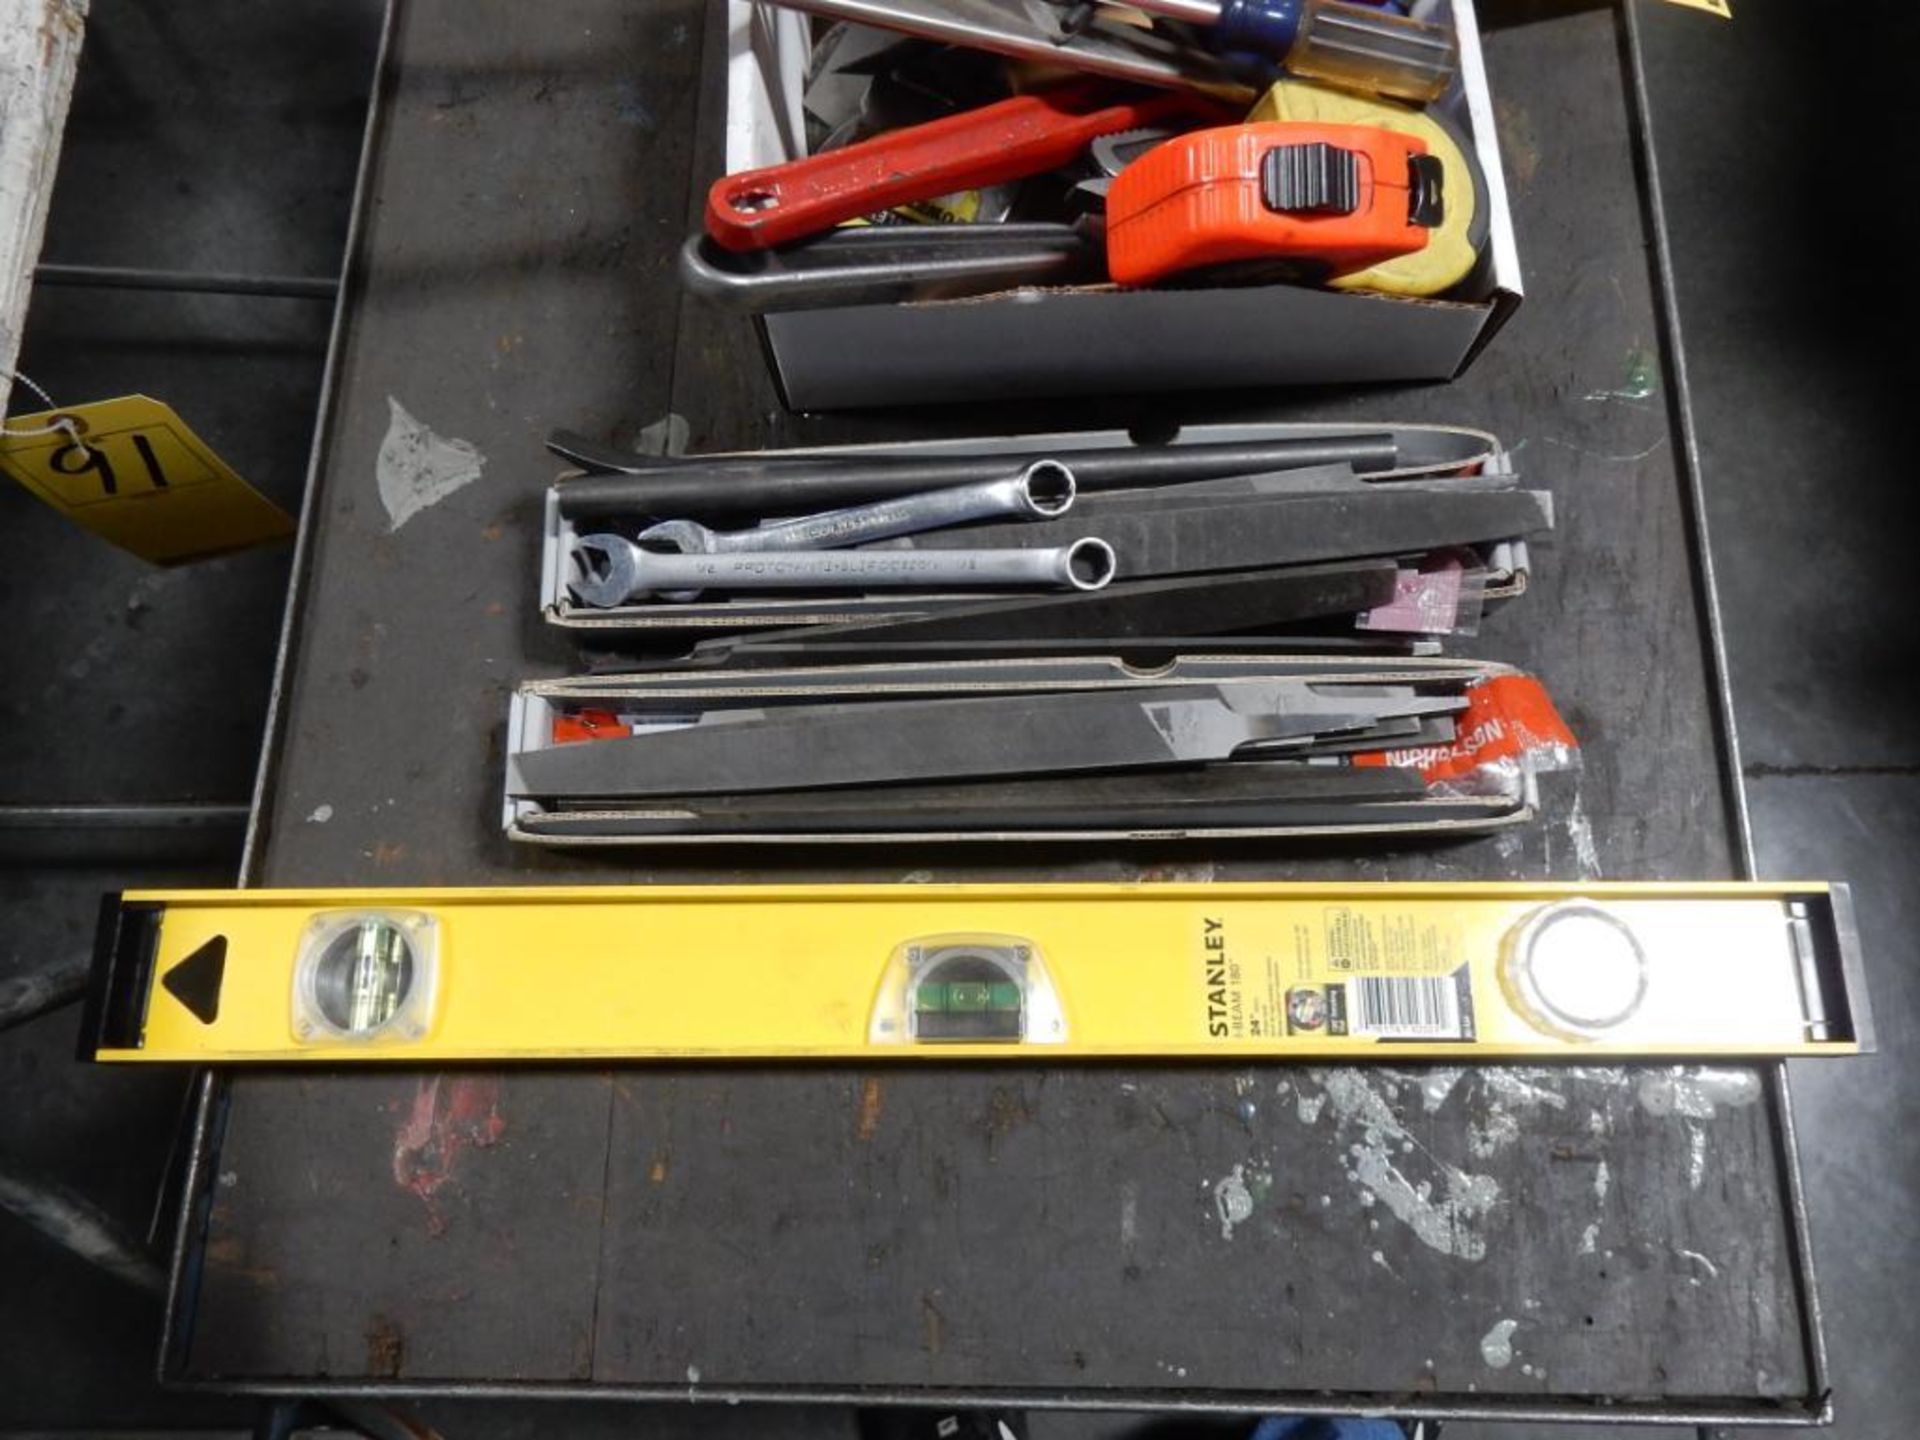 LOT MISC. HAND TOOLS - FILES, LEVELS, SCREW DRIVERS, ETC. - Image 2 of 3